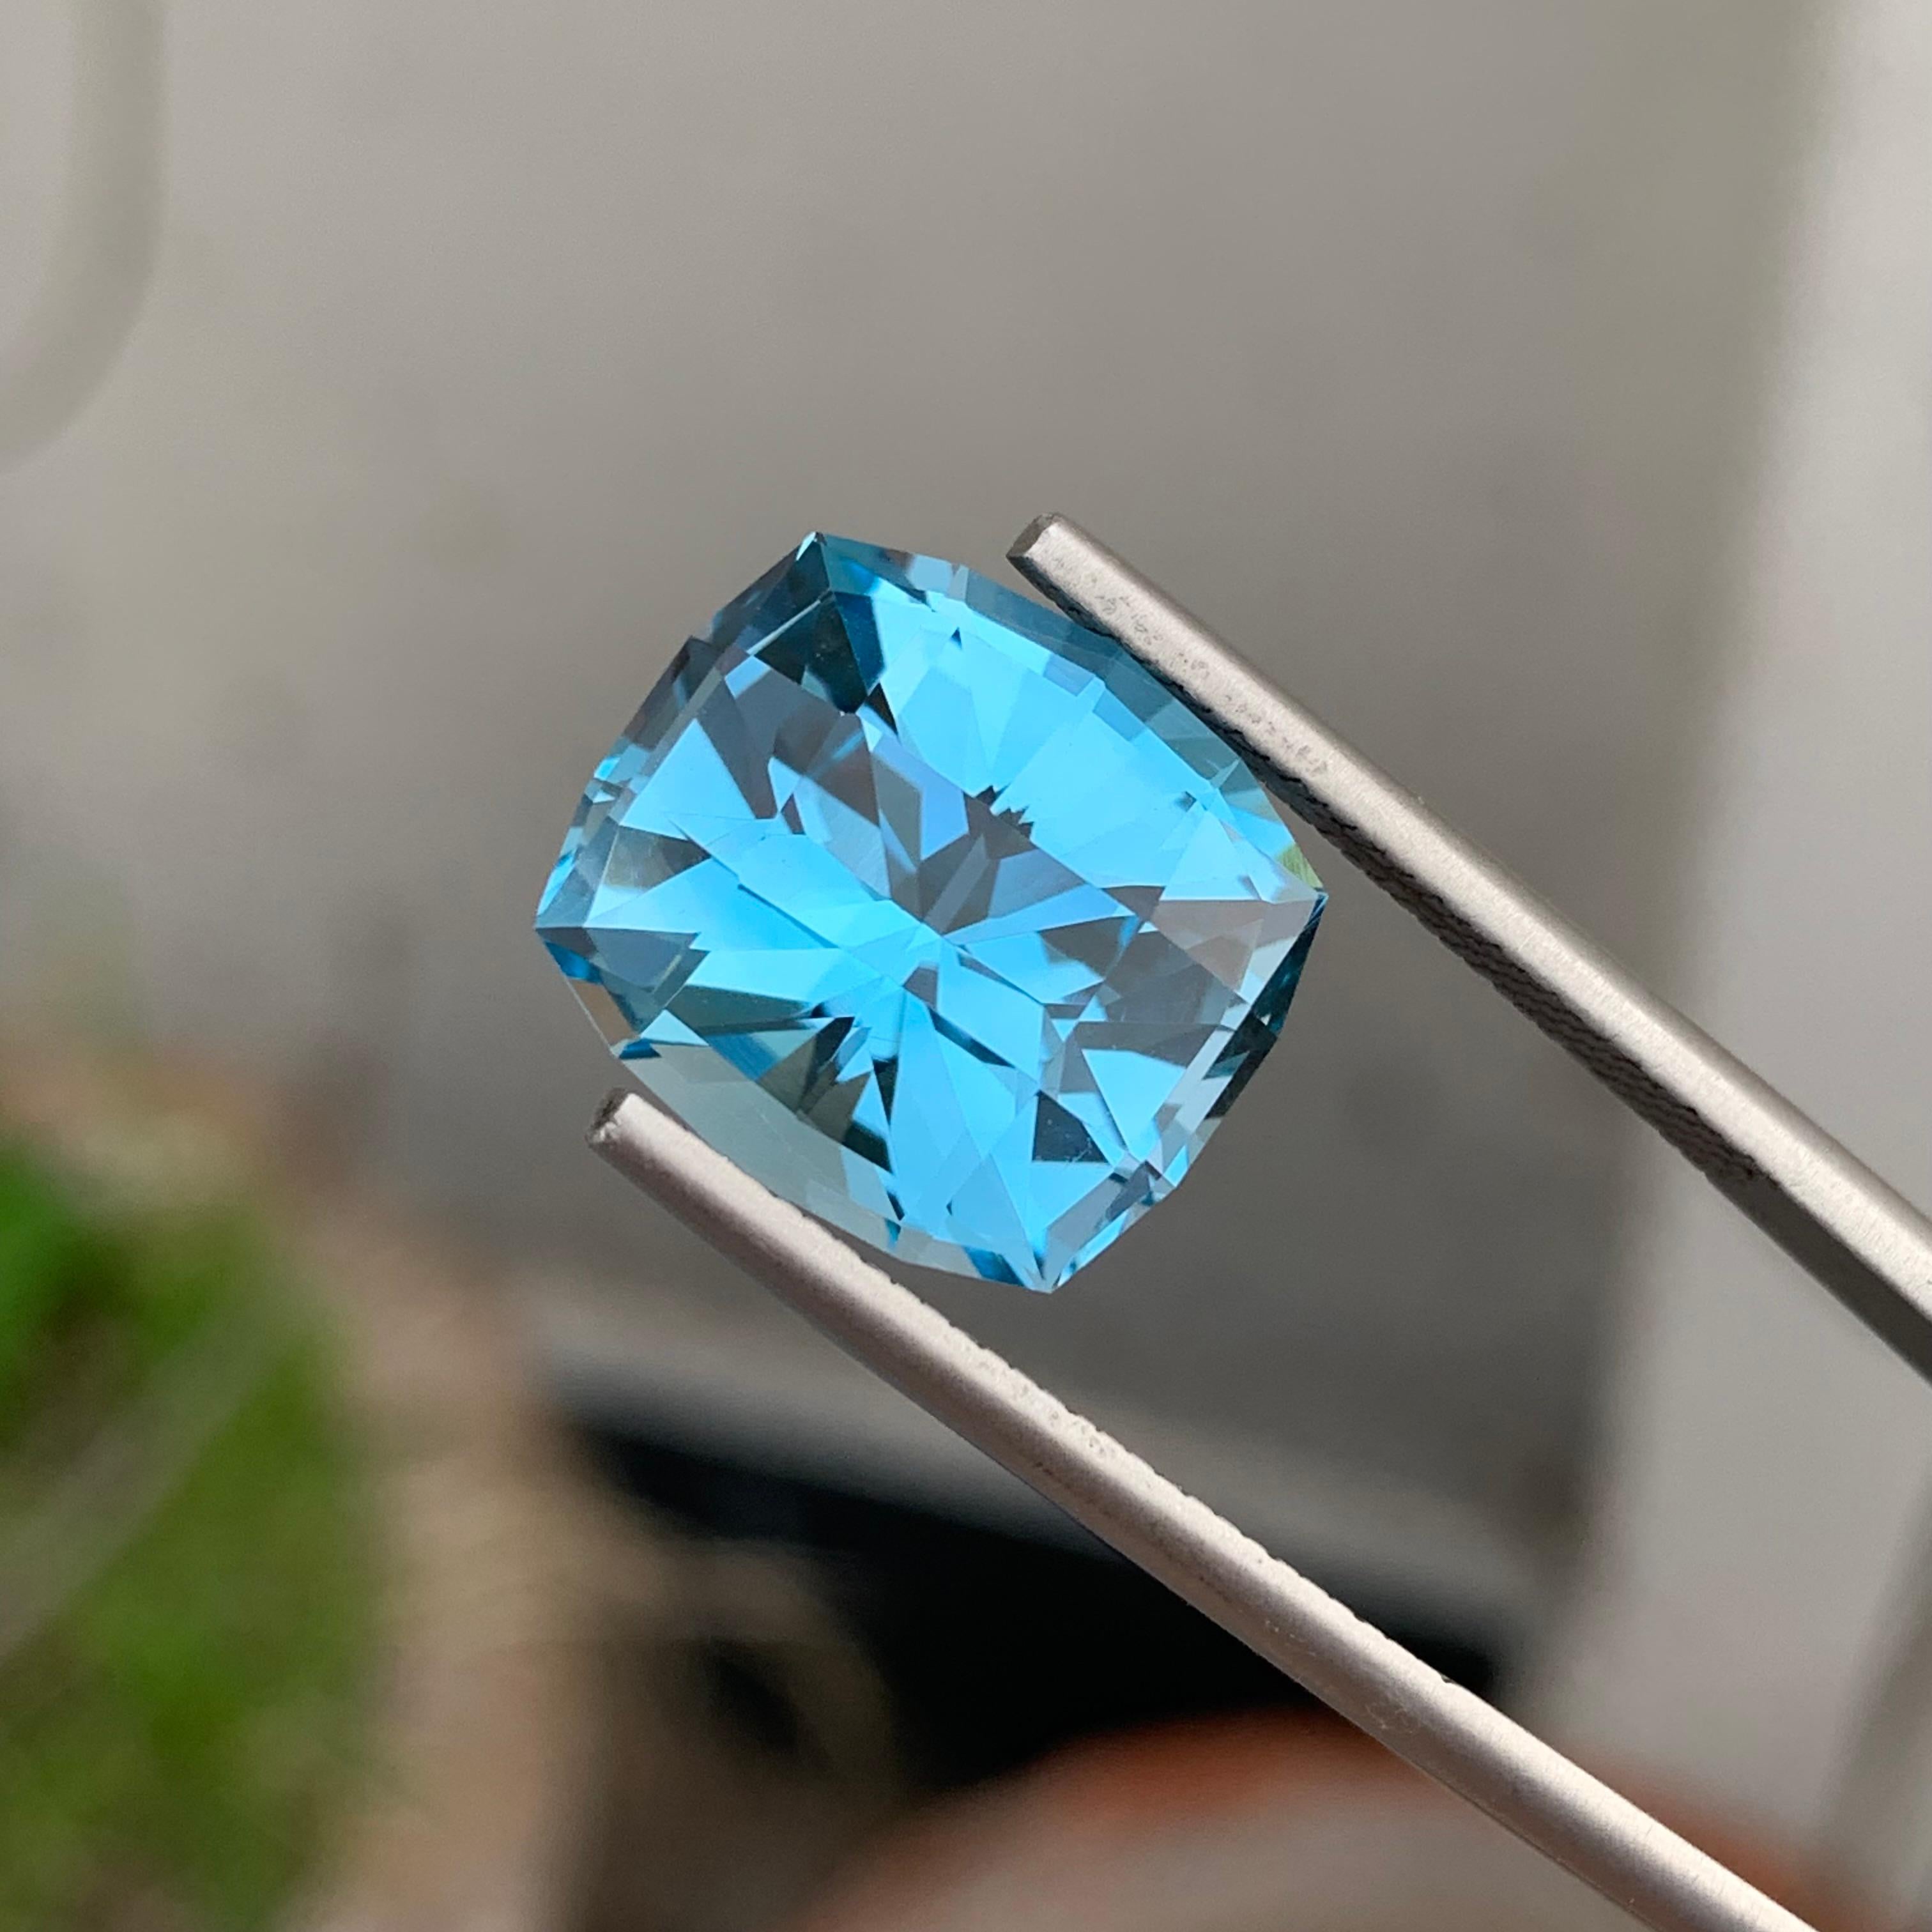 12.15 Carat Fancy Cut Faceted Sky Blue Topaz Gemstone For Jewellery Making  For Sale 5